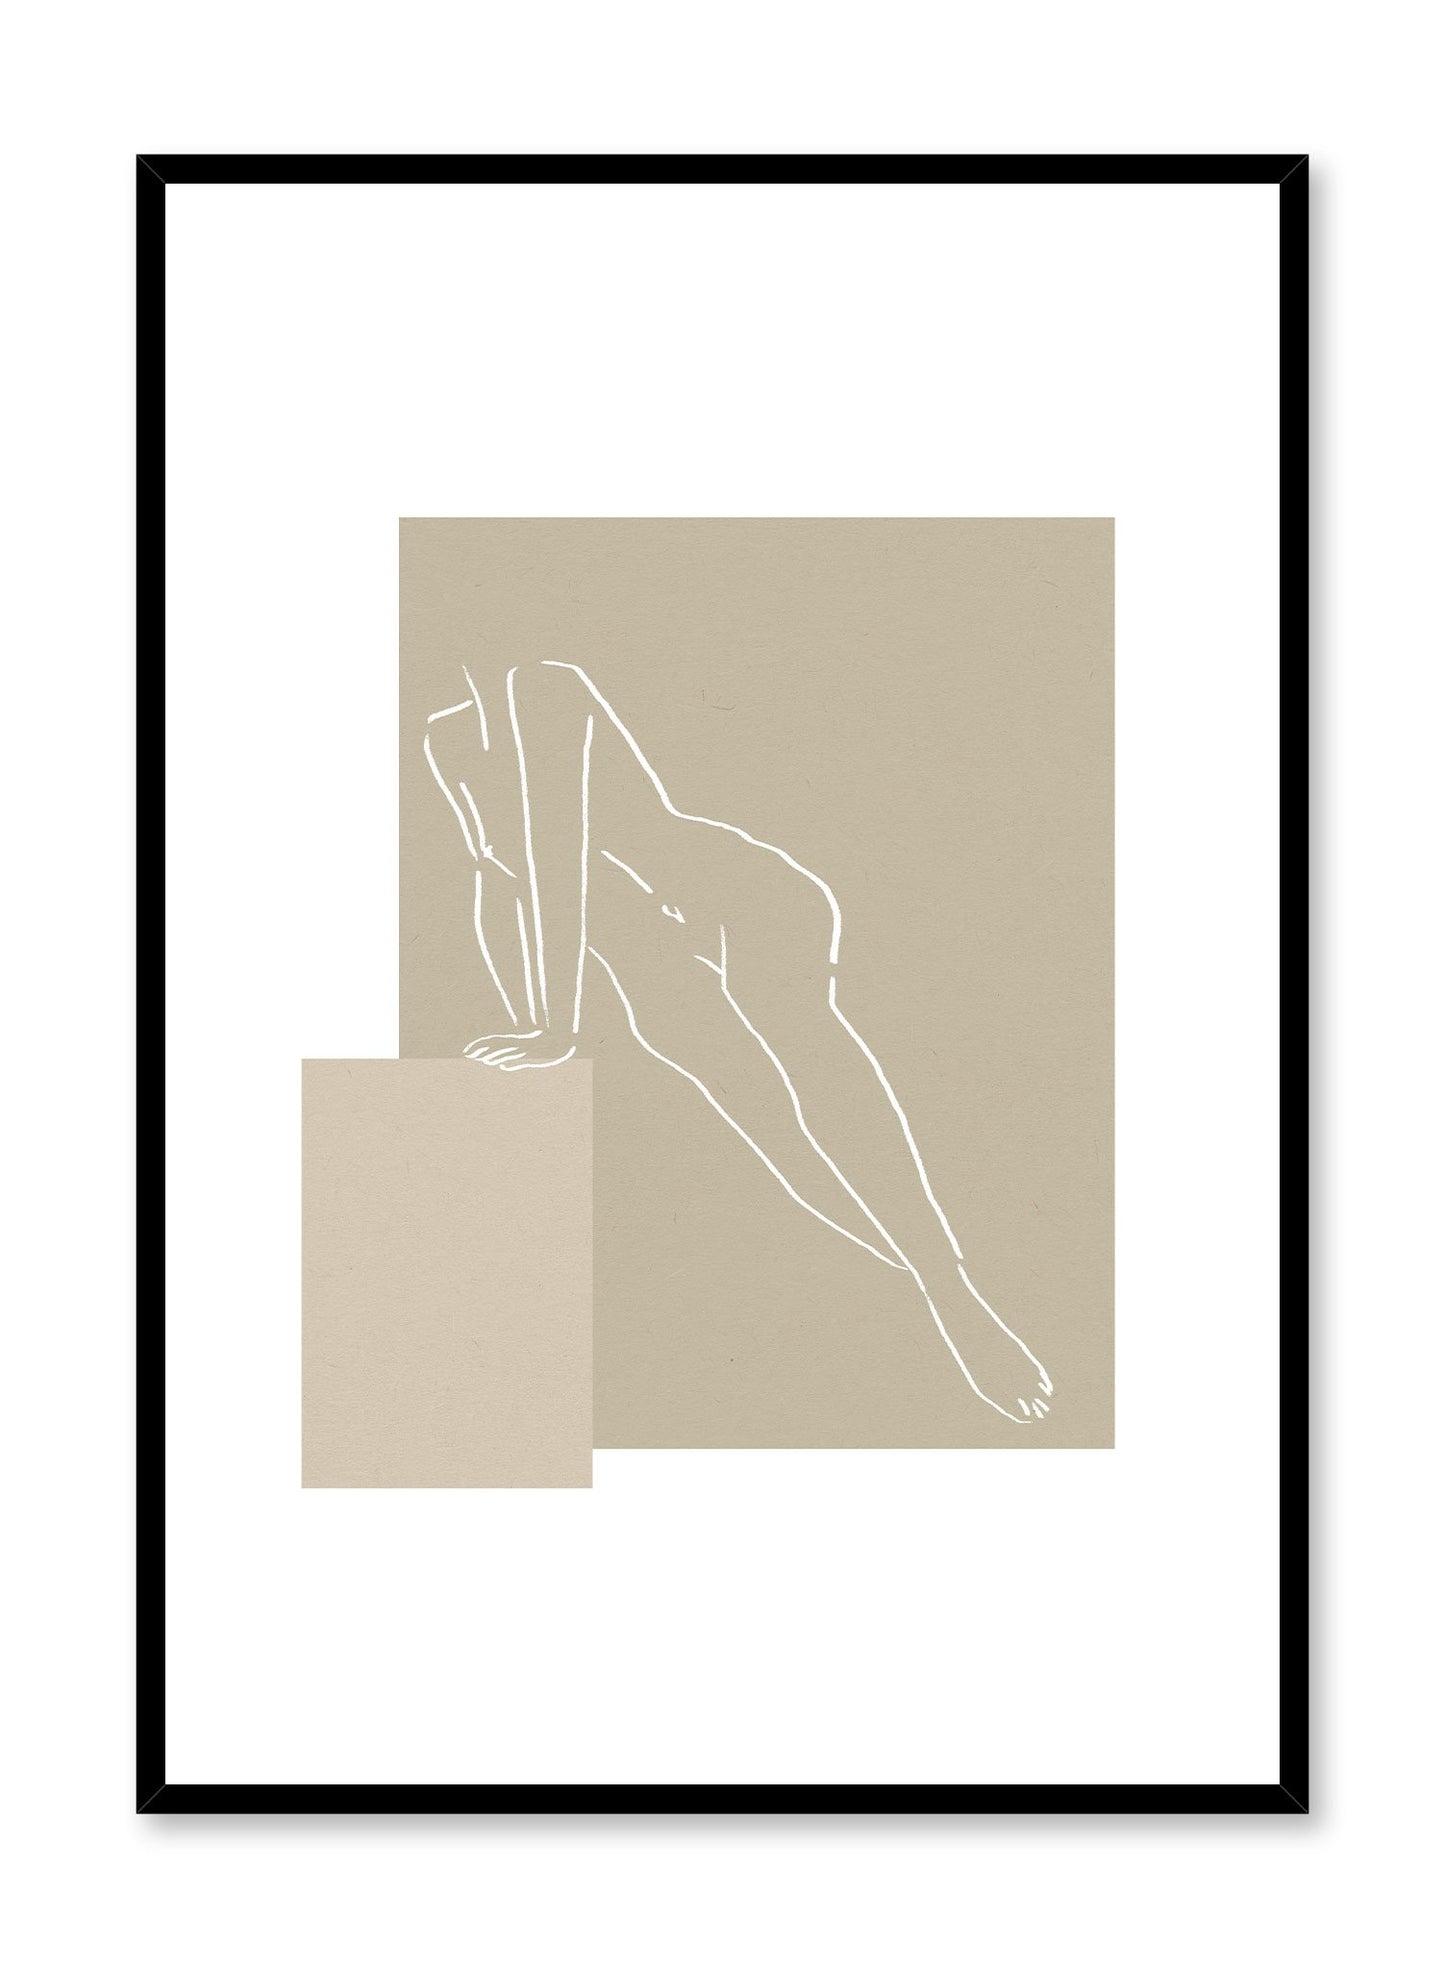 Stepping Stone is a line art illustration of a naked woman leaning on a rectangular box by Opposite Wall.